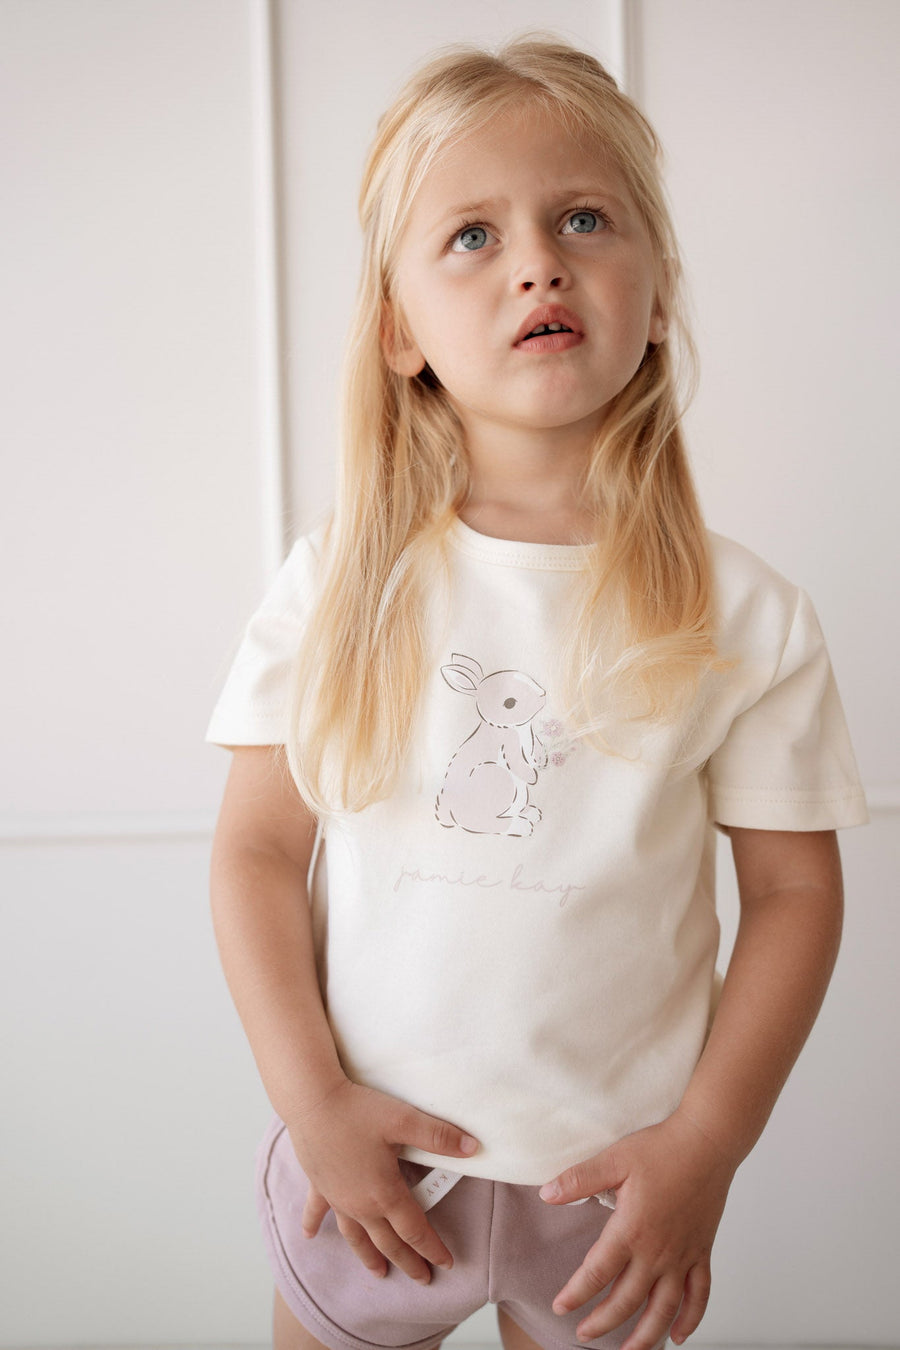 Pima Cotton Aude Oversized Tee - Parchment Childrens Top from Jamie Kay USA